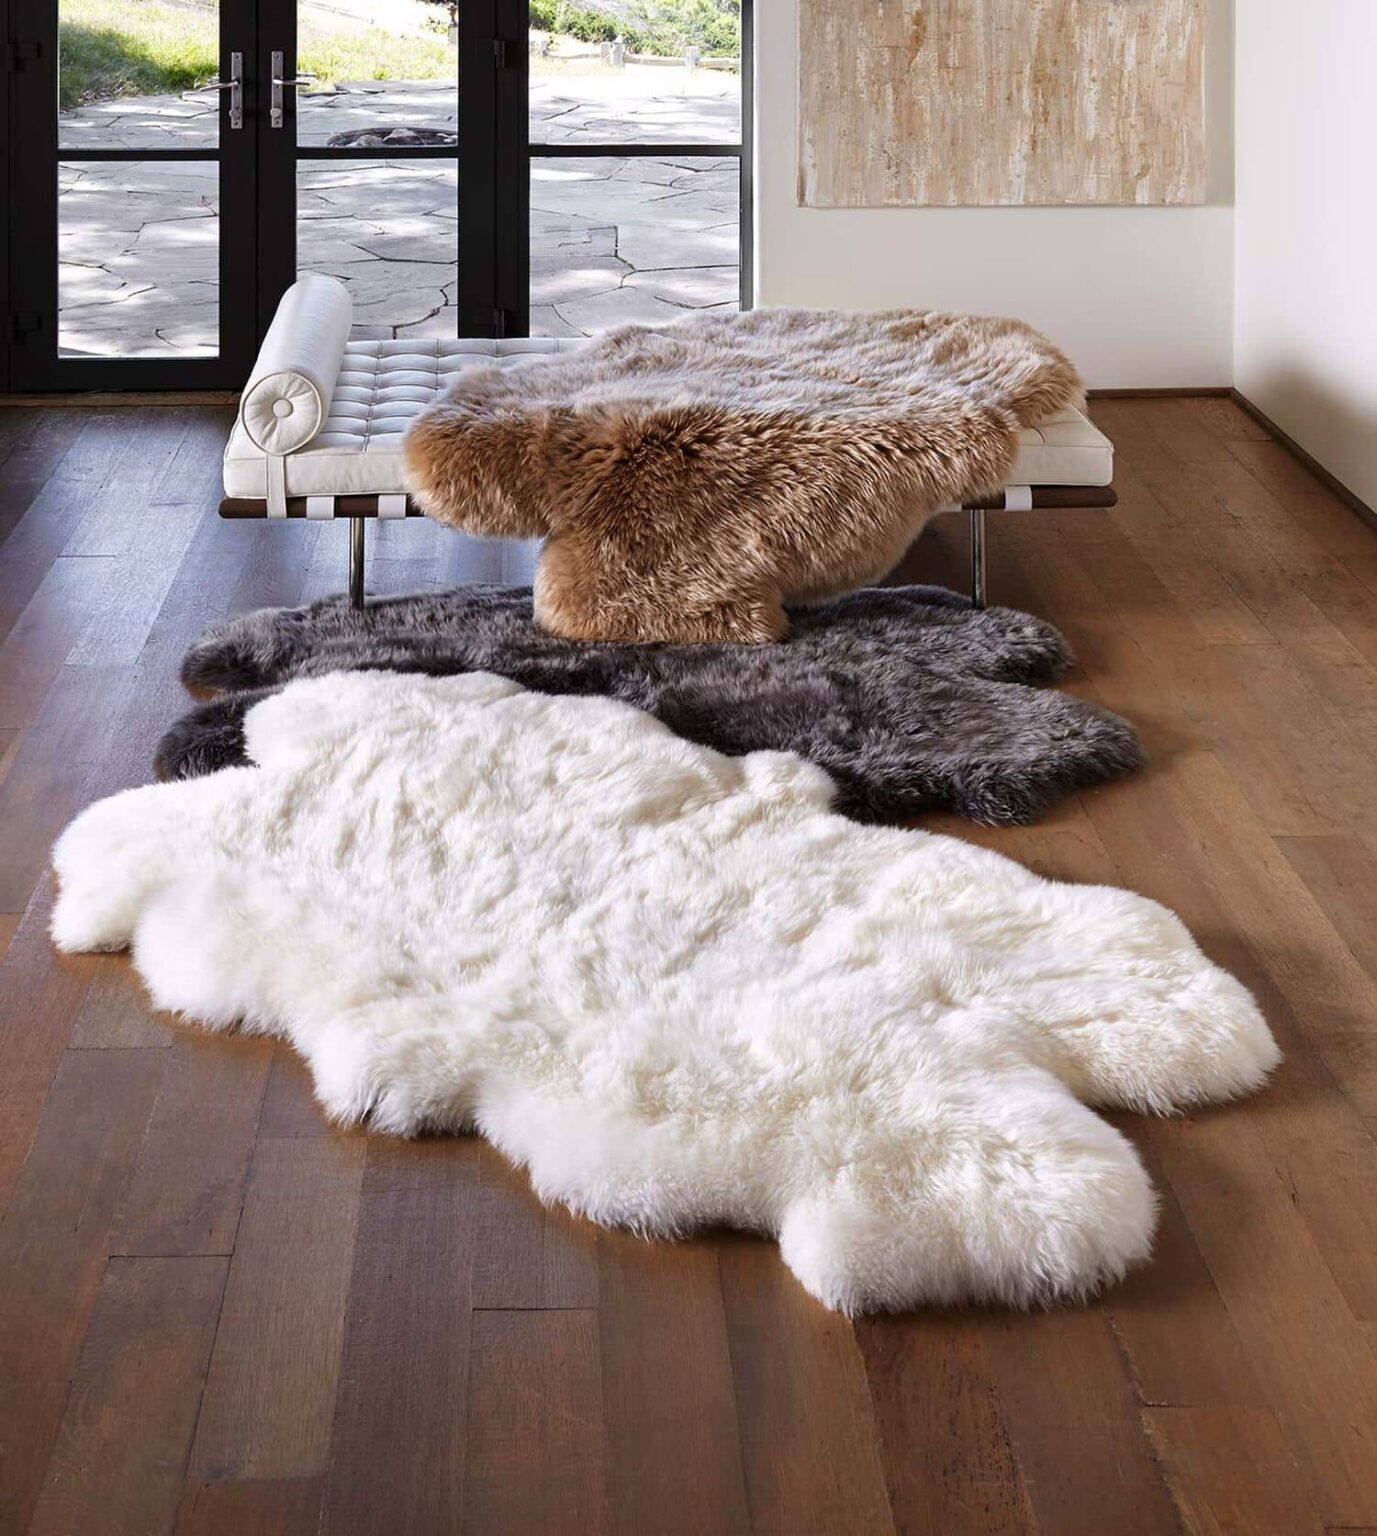 How to Clean Sheepskin Rug | The Best Methods